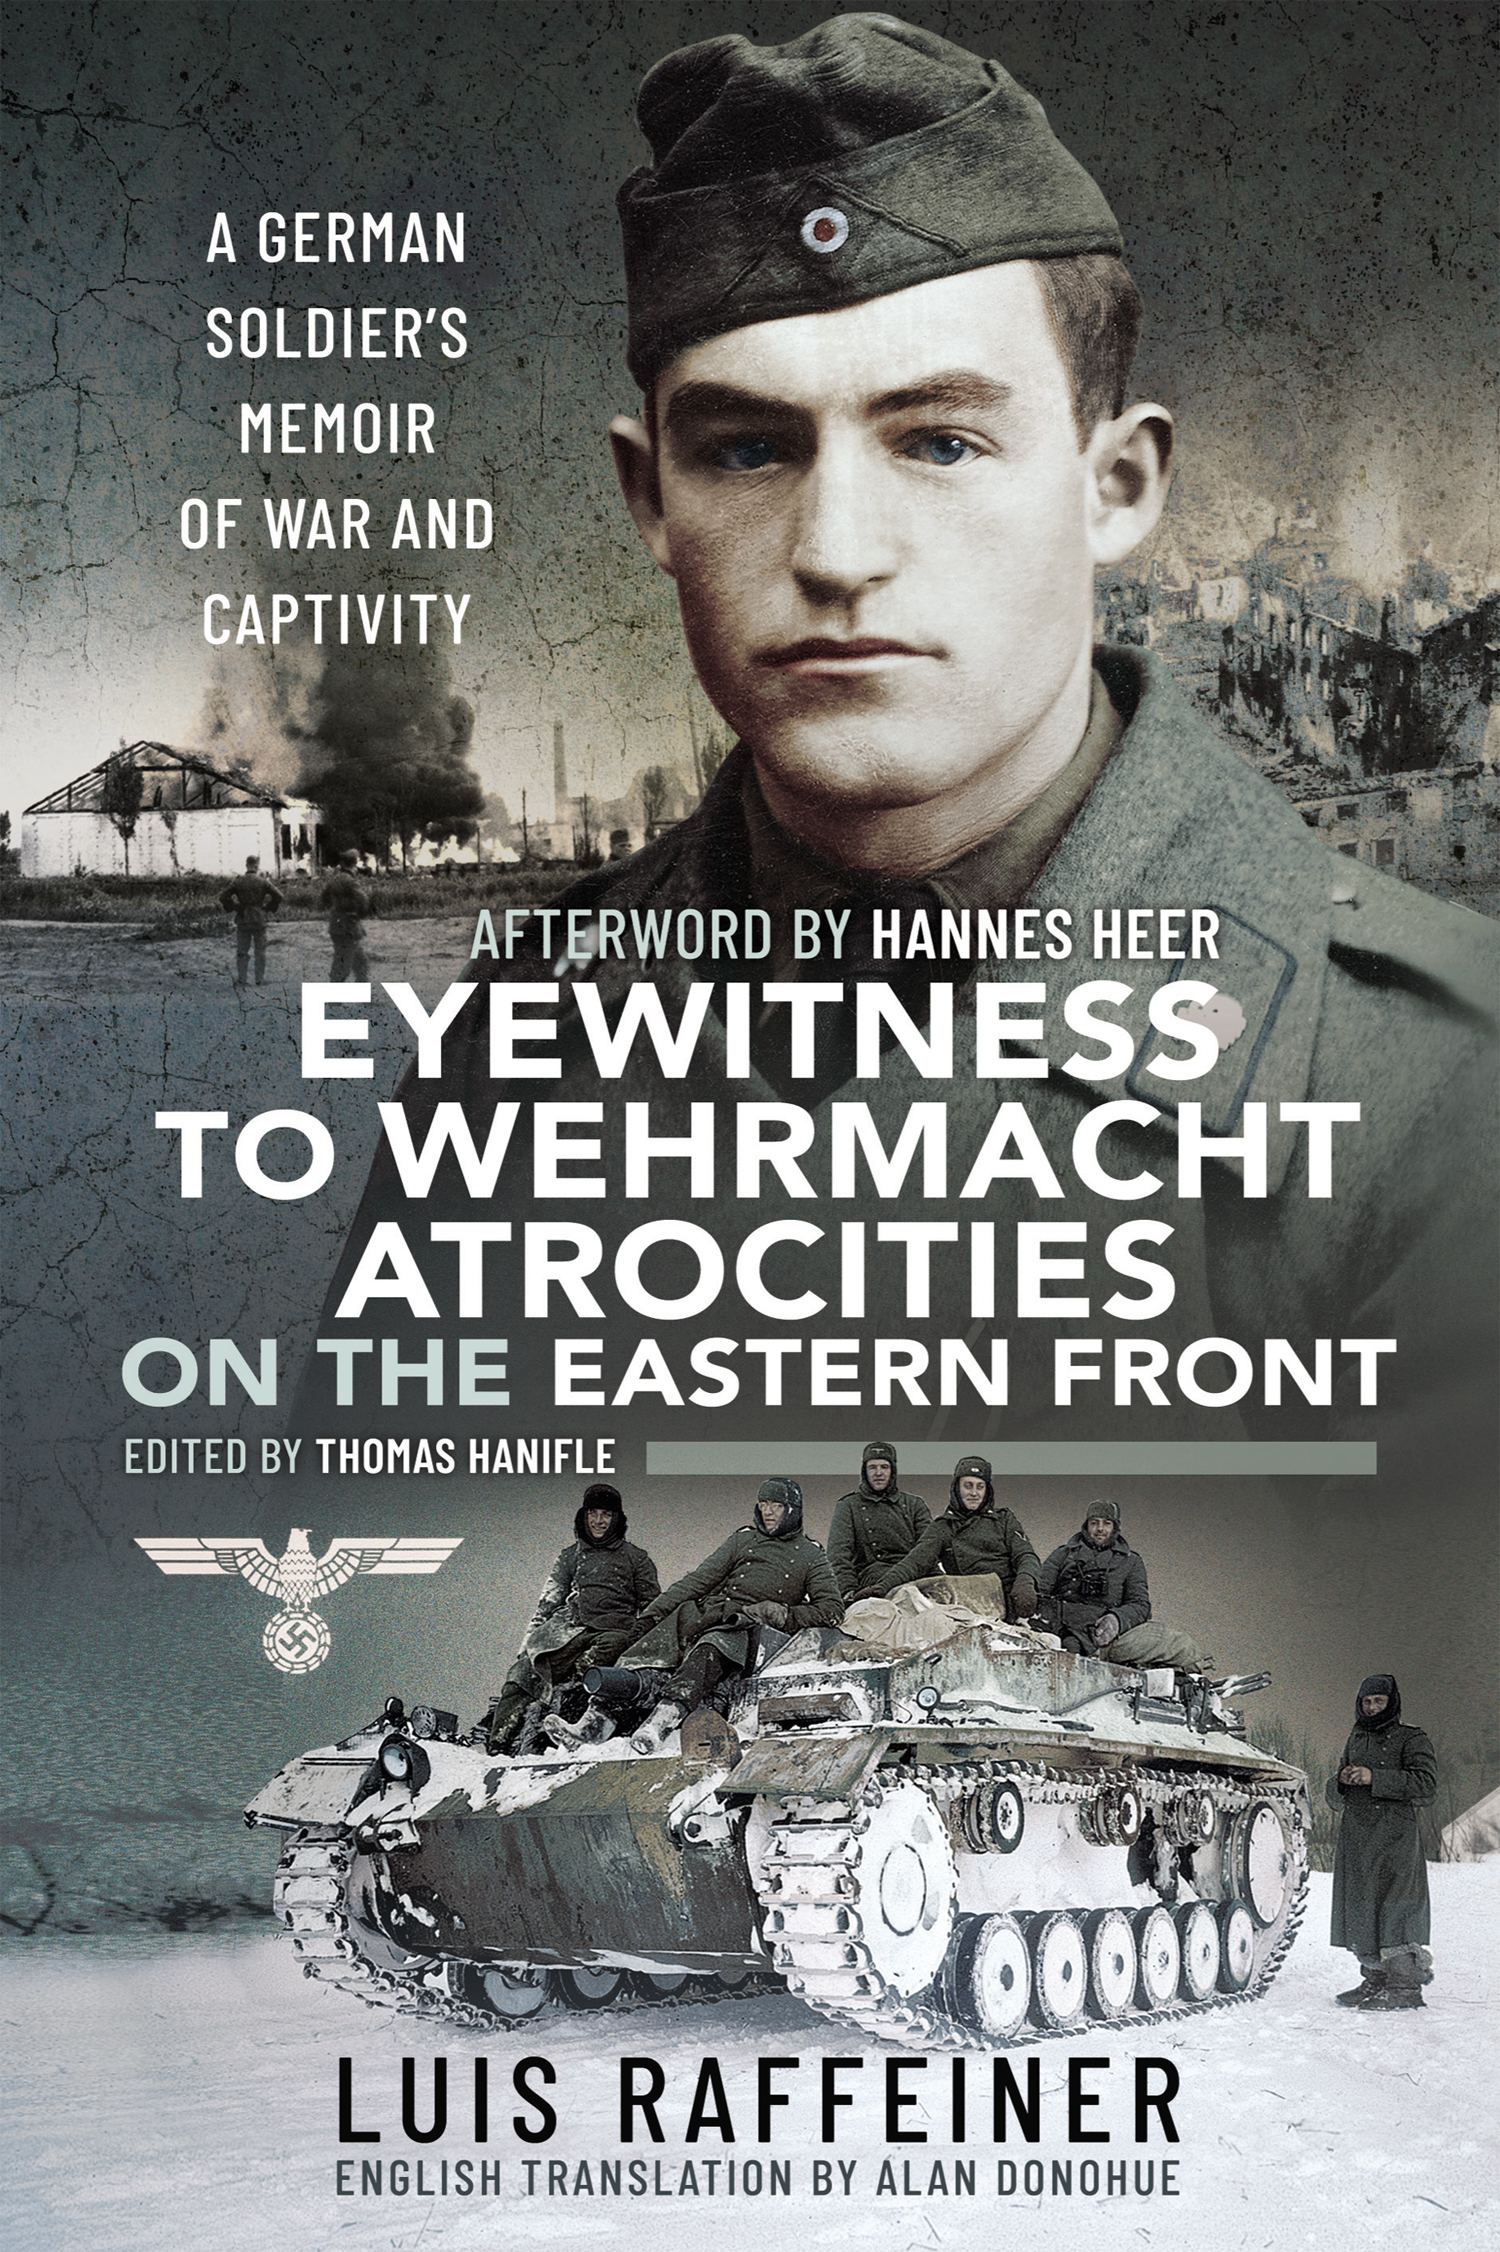 Eyewitness to Wehrmacht Atrocities on the Eastern Front - 15-24.99